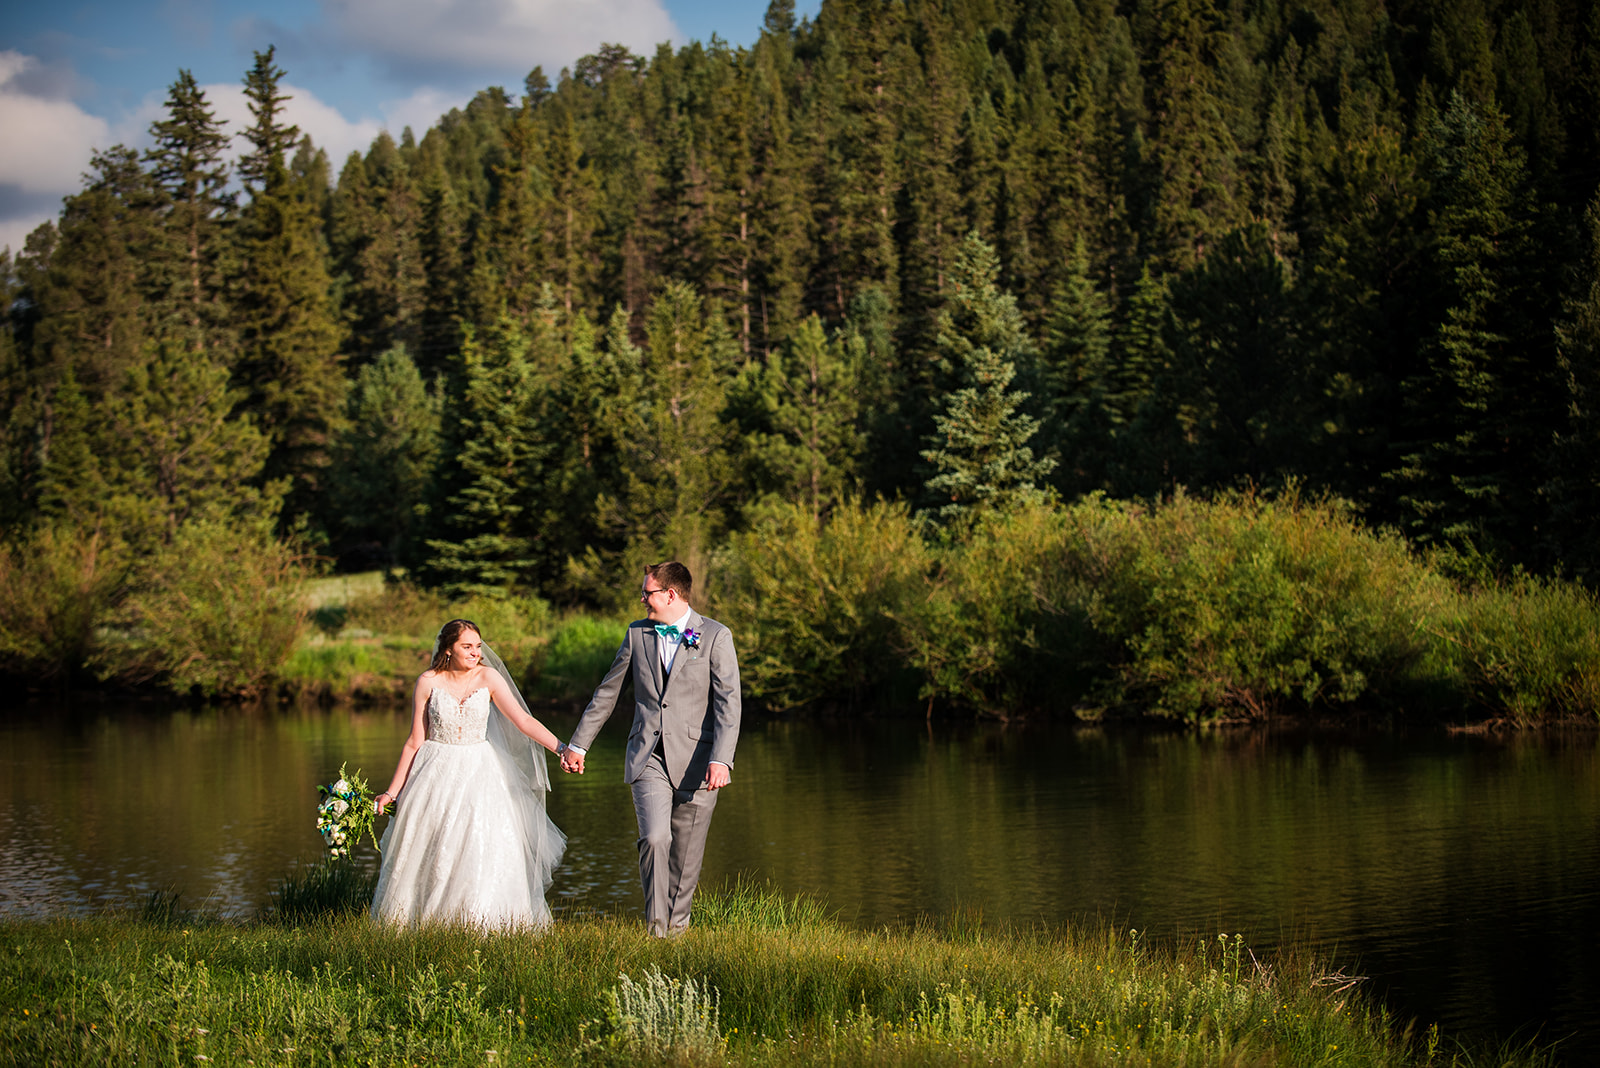 The bride and groom walk toward the camera hand-in-hand with a lake and pine trees in the background.